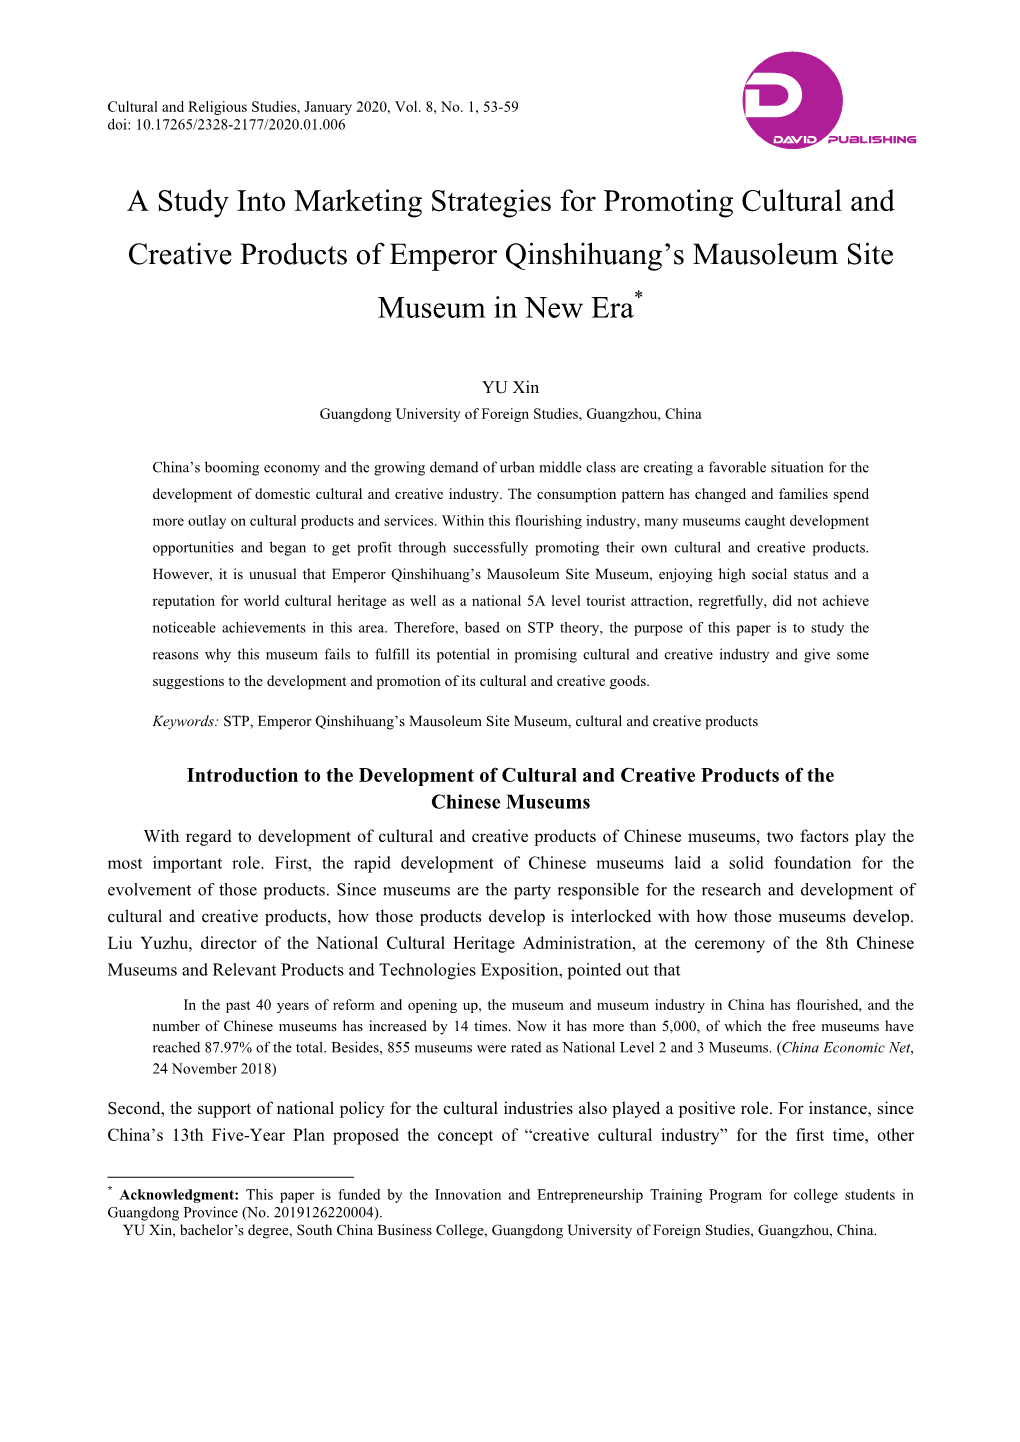 A Study Into Marketing Strategies for Promoting Cultural and Creative Products of Emperor Qinshihuang’S Mausoleum Site Museum in New Era*